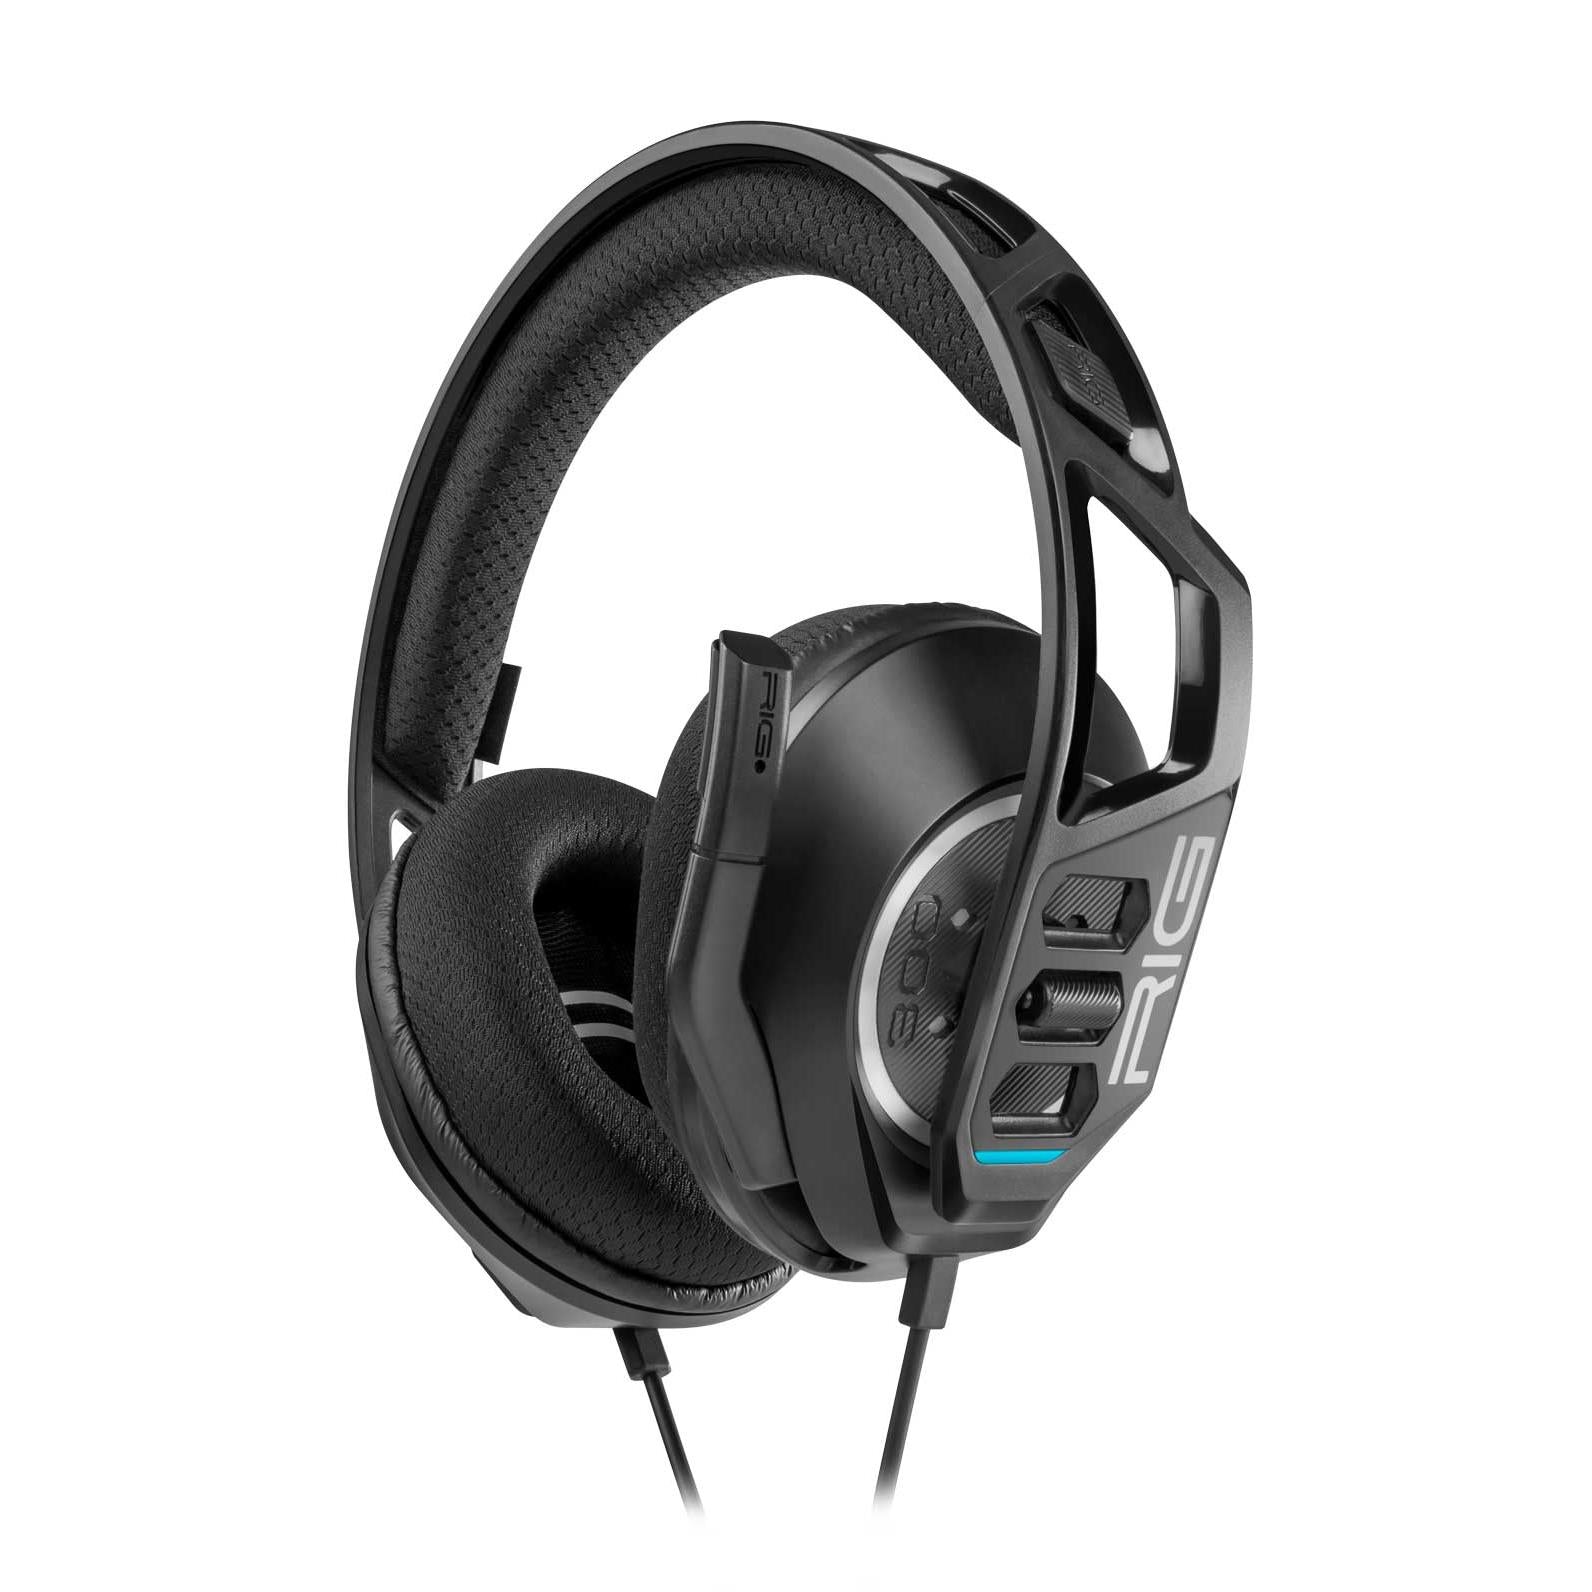 rig 300 pro hn gaming headset for nintendo switch